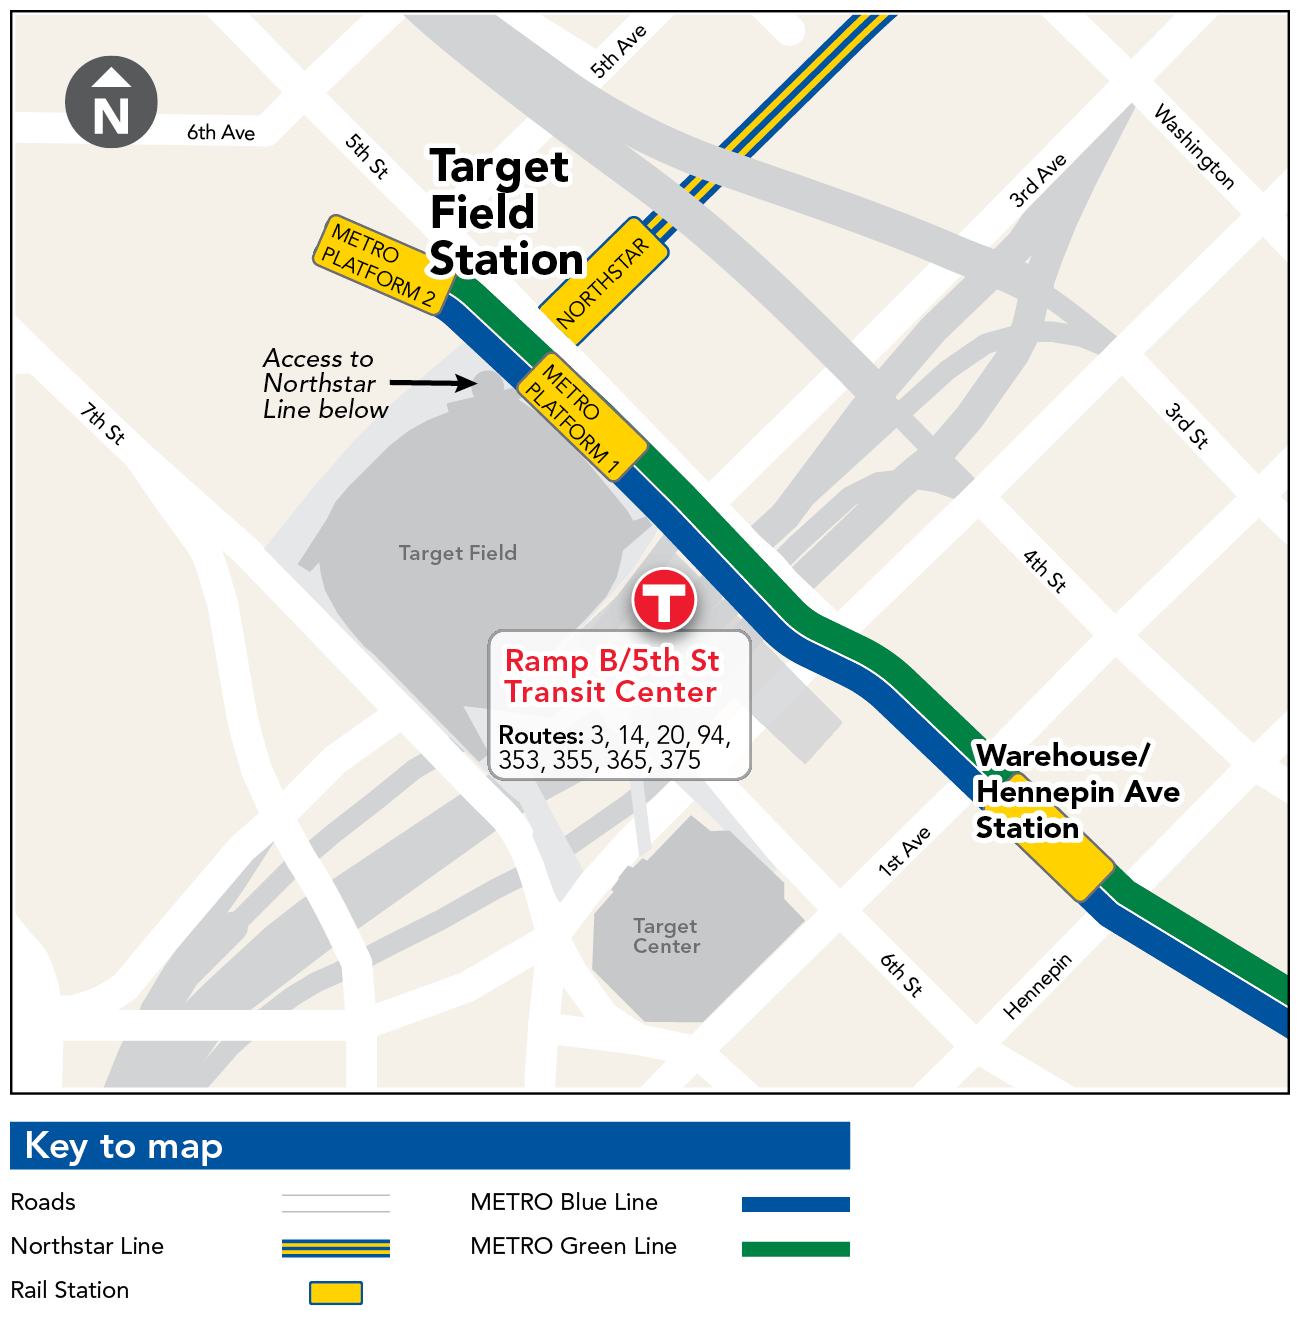 Target Field Station Map